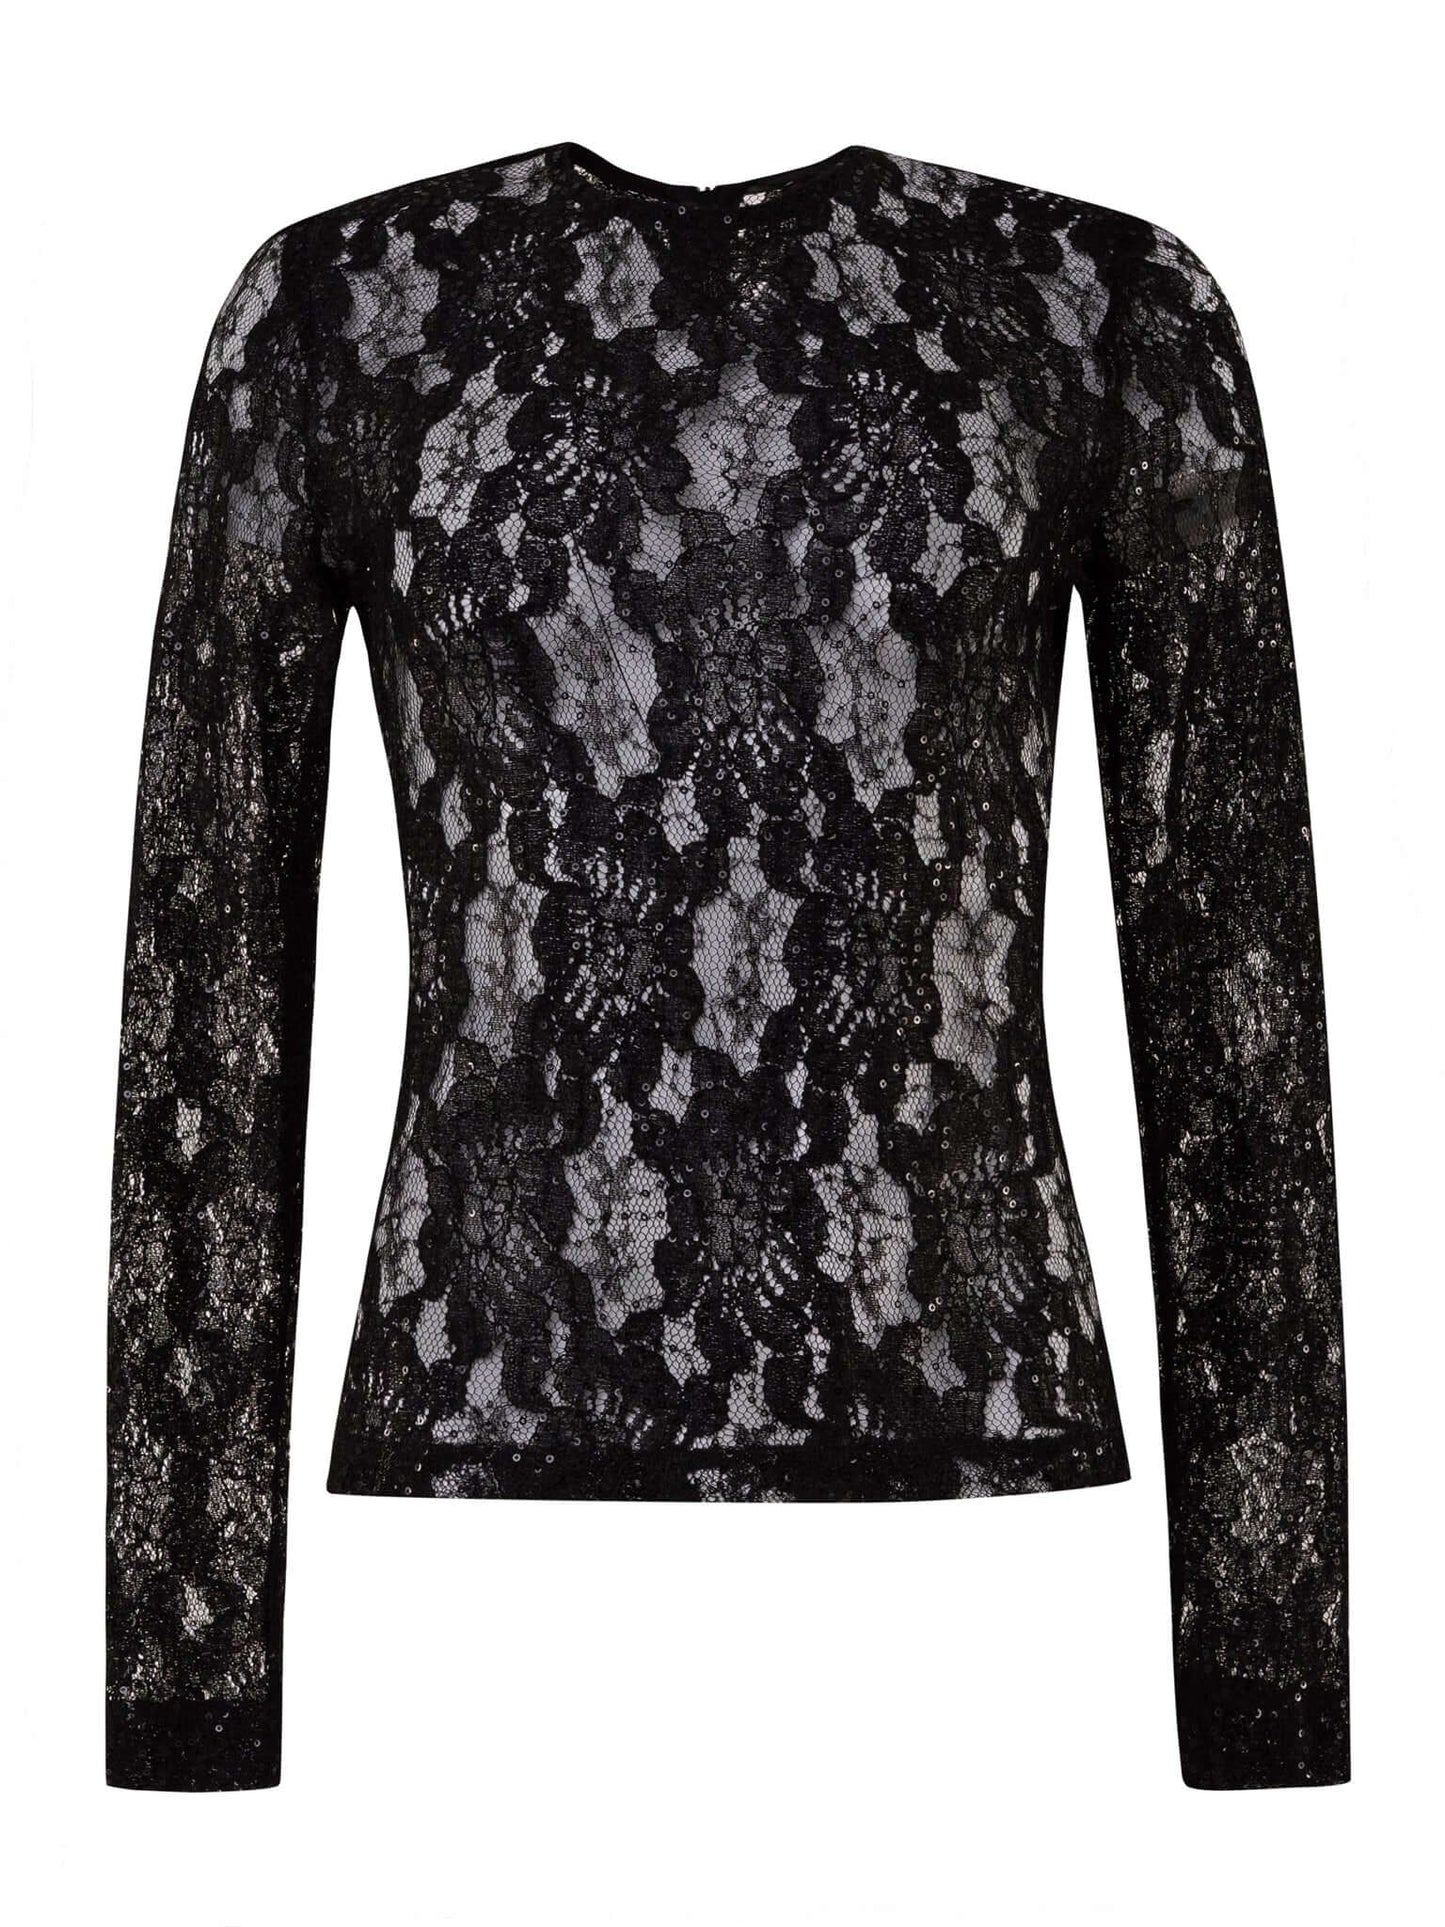 Glowing in the Dark Sheer Lace Blouse by Tia Dorraine Women's Luxury Fashion Designer Clothing Brand